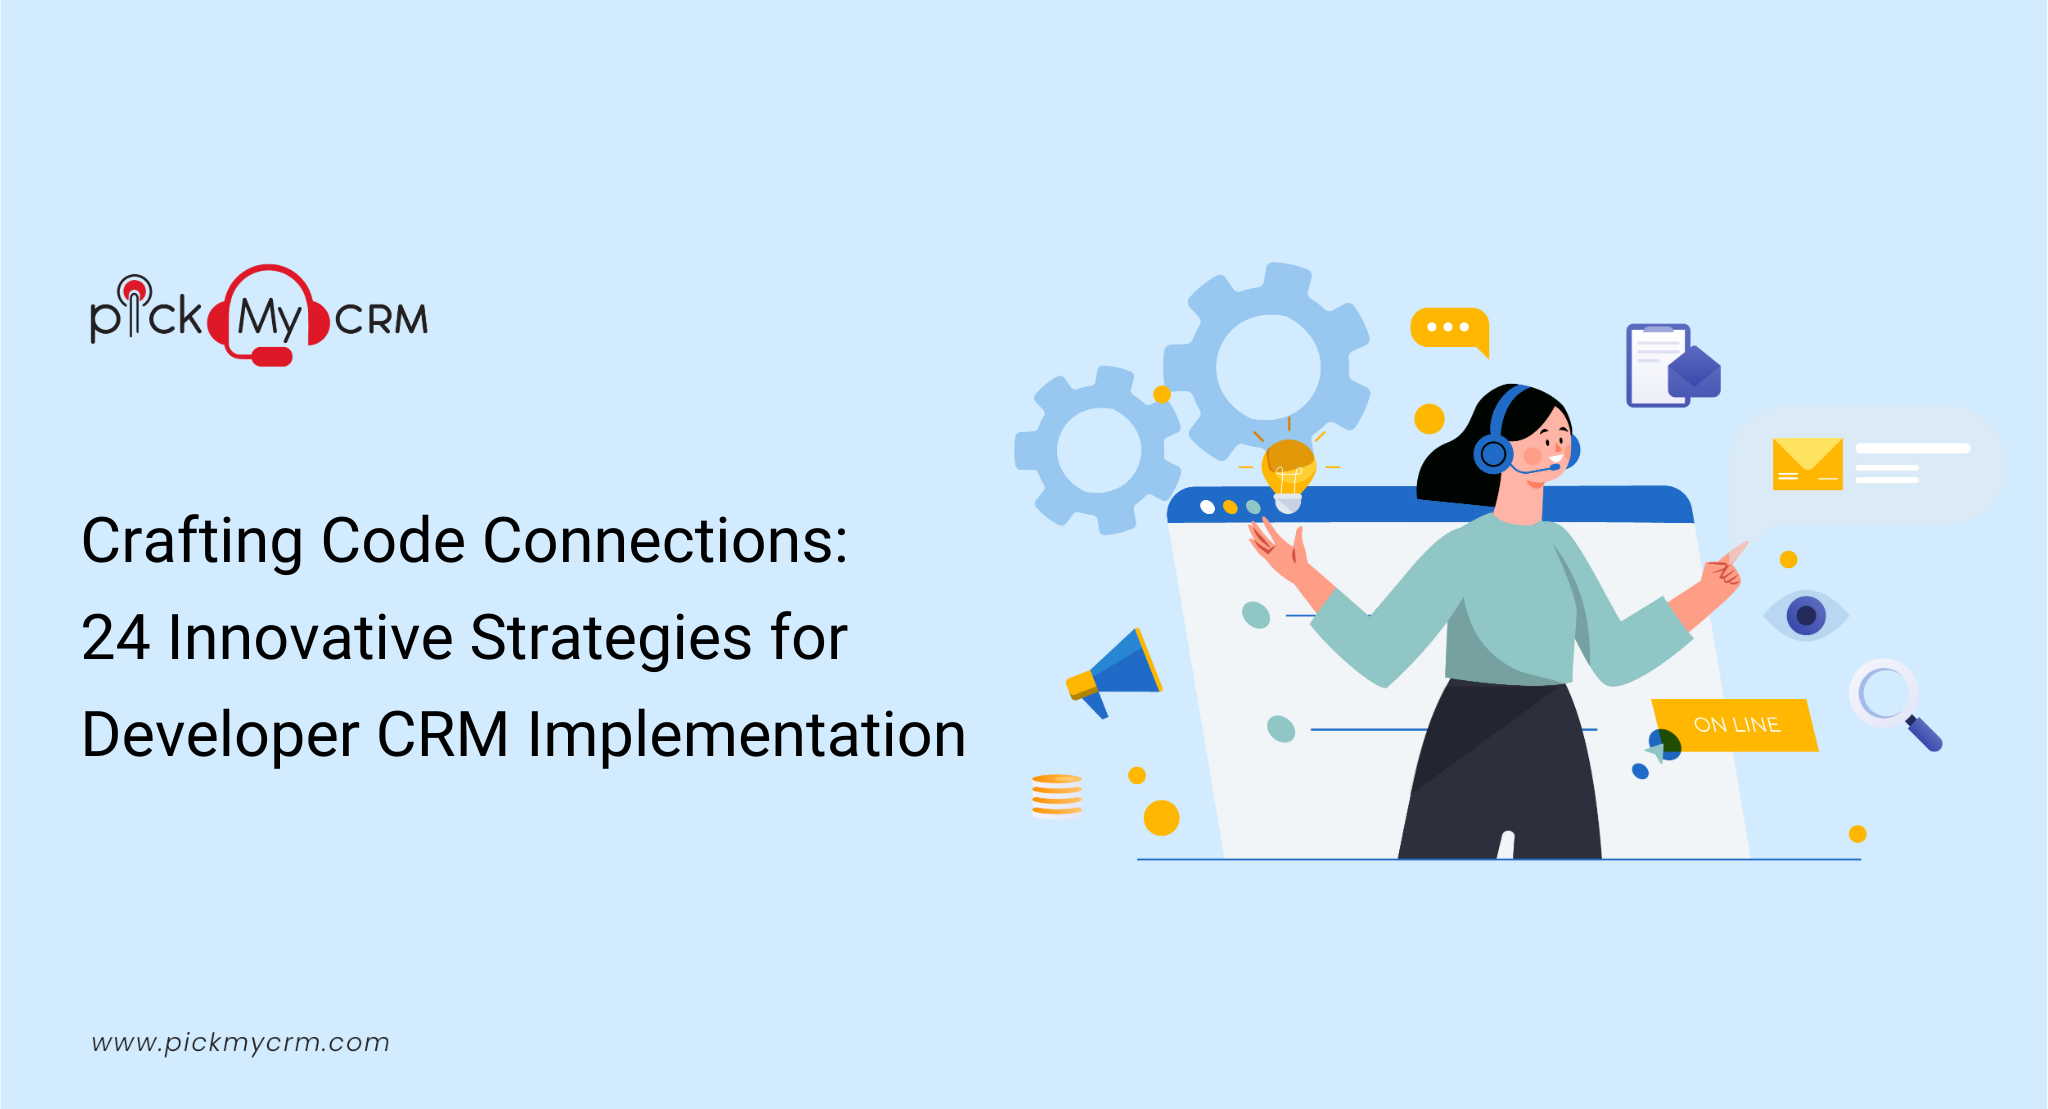 Crafting Code Connections: 24 Innovative Strategies for Developer CRM Implementation